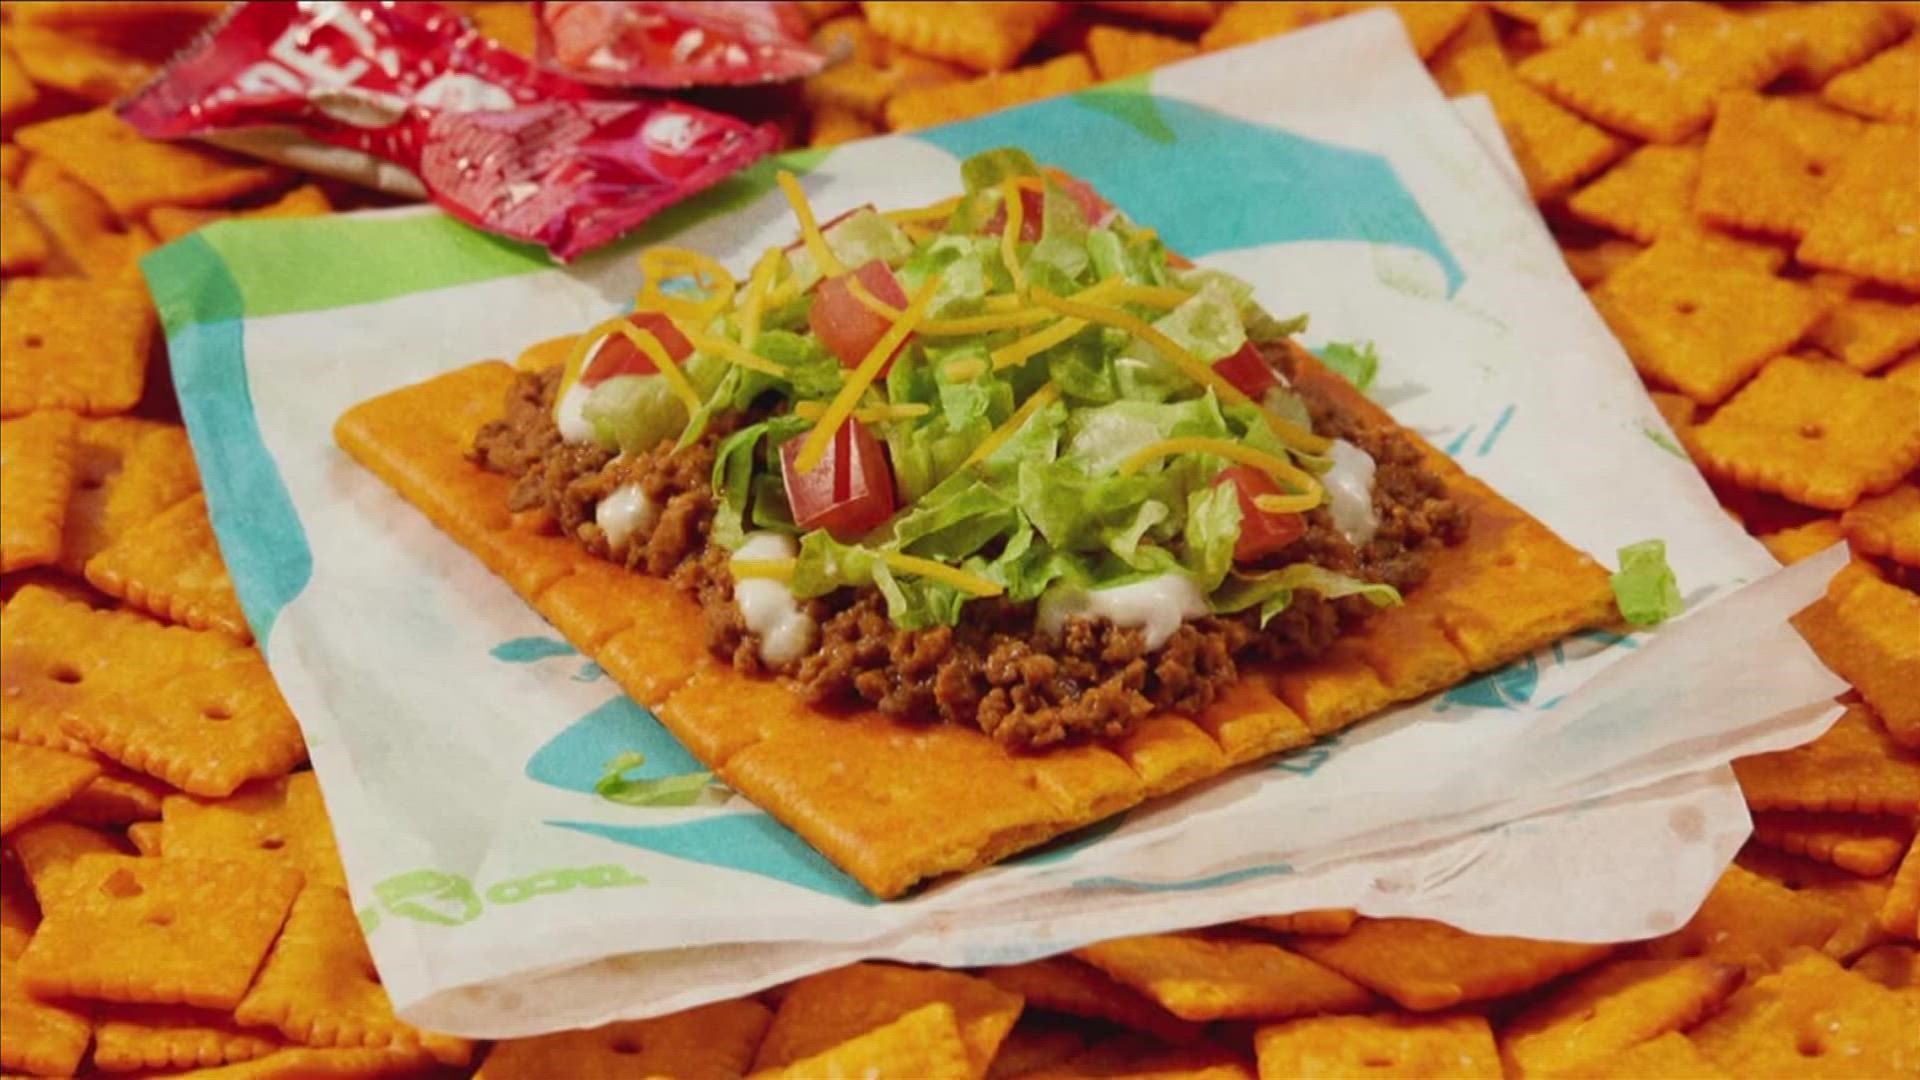 The Big Cheez-It Tostada sells for $2.49, while the Big Cheez-It Crunchwrap Supreme costs $4.29.